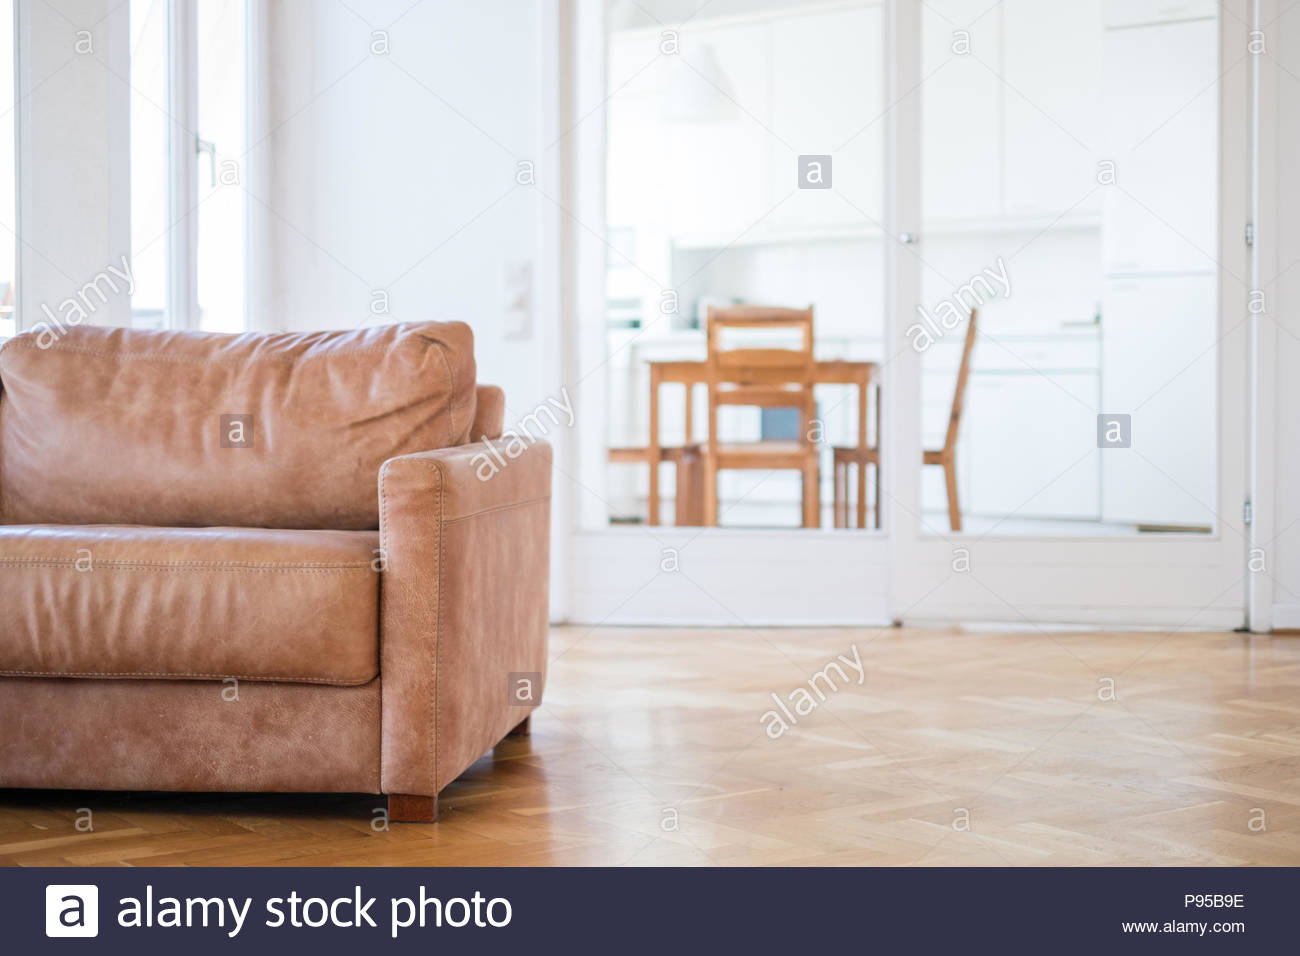 Empty Couch Seat In Living Room With Wooden Floor And Kitchen